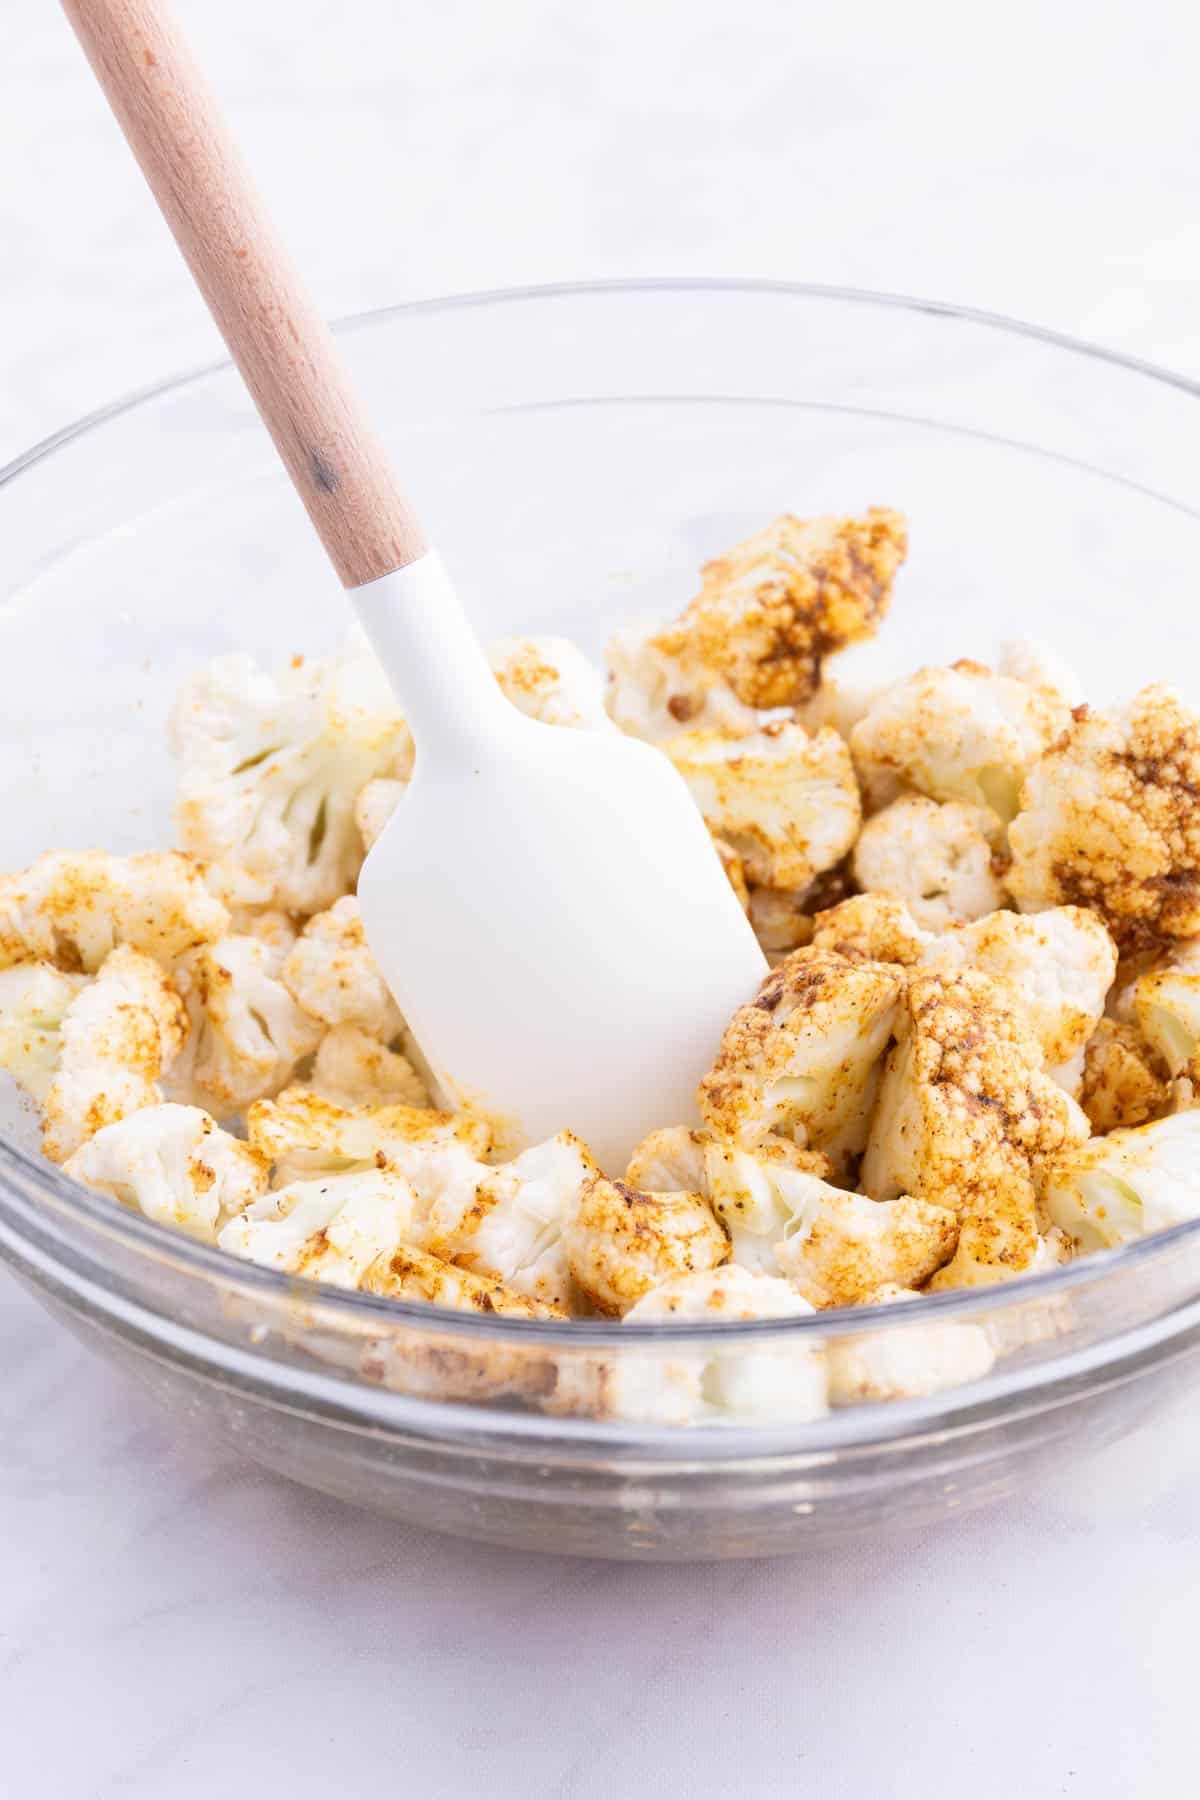 Cauliflower is seasoned with spices.